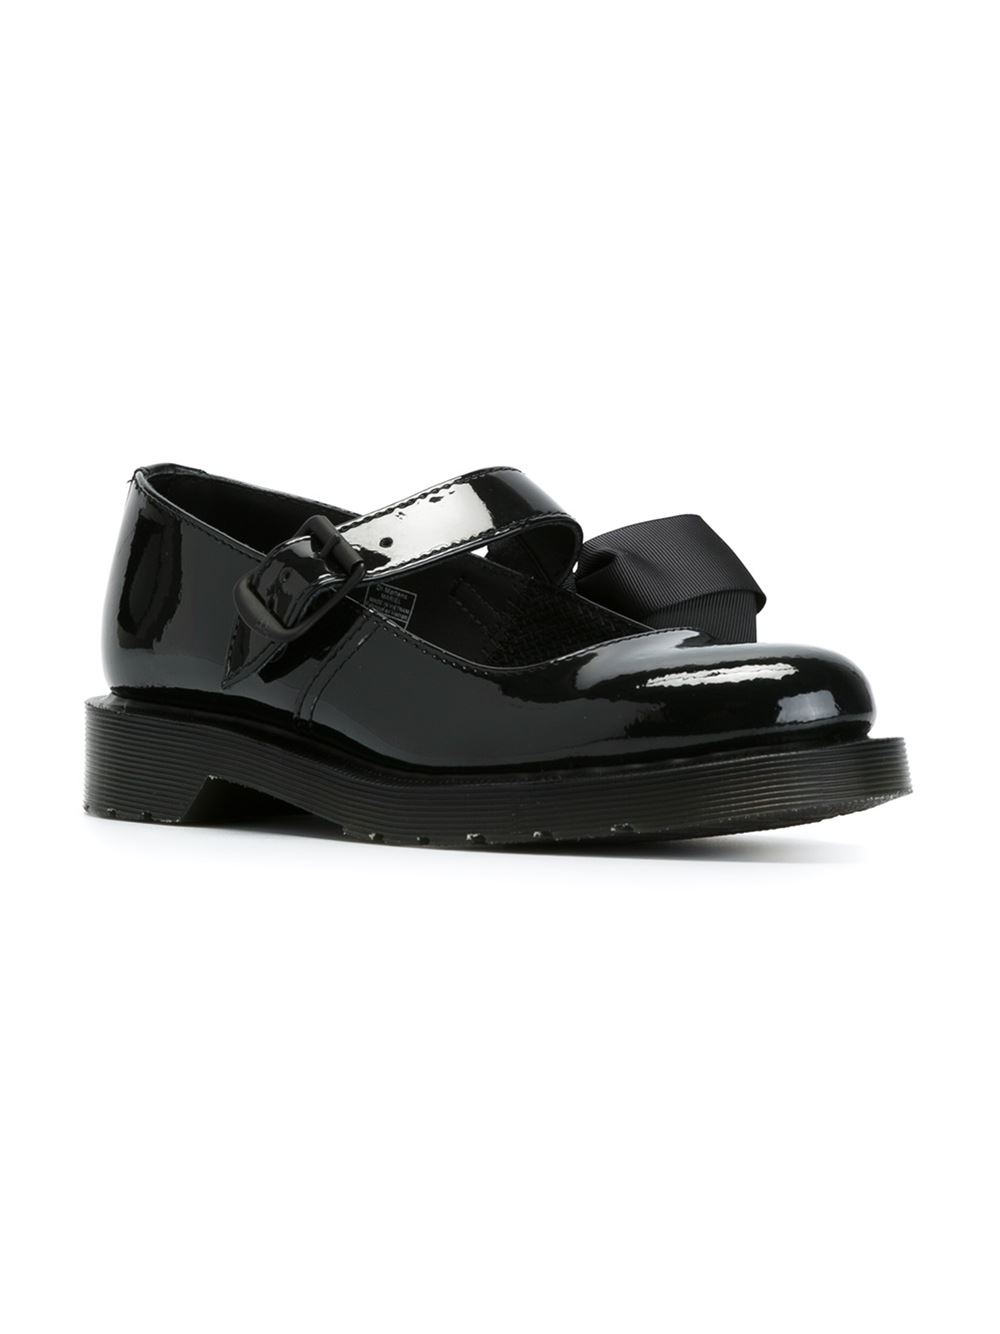 Dr. Martens Mariel Patent-Leather Mary-Jane Shoes in Black - Lyst